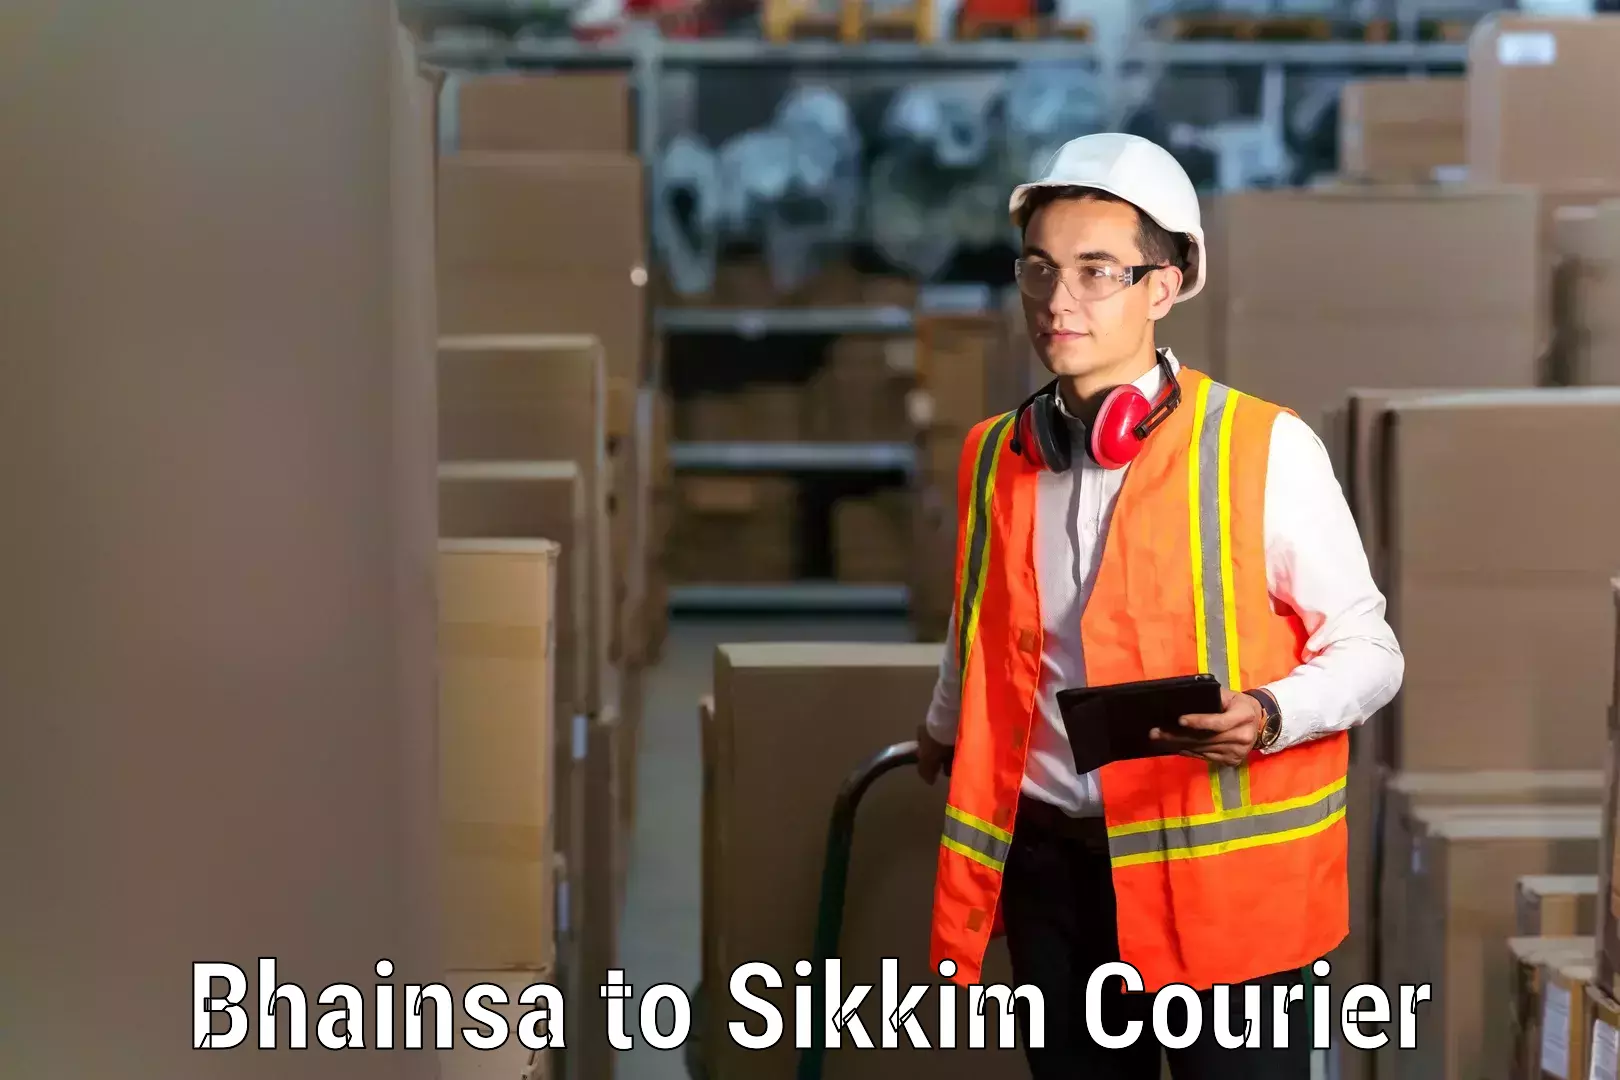 Furniture delivery service Bhainsa to Sikkim